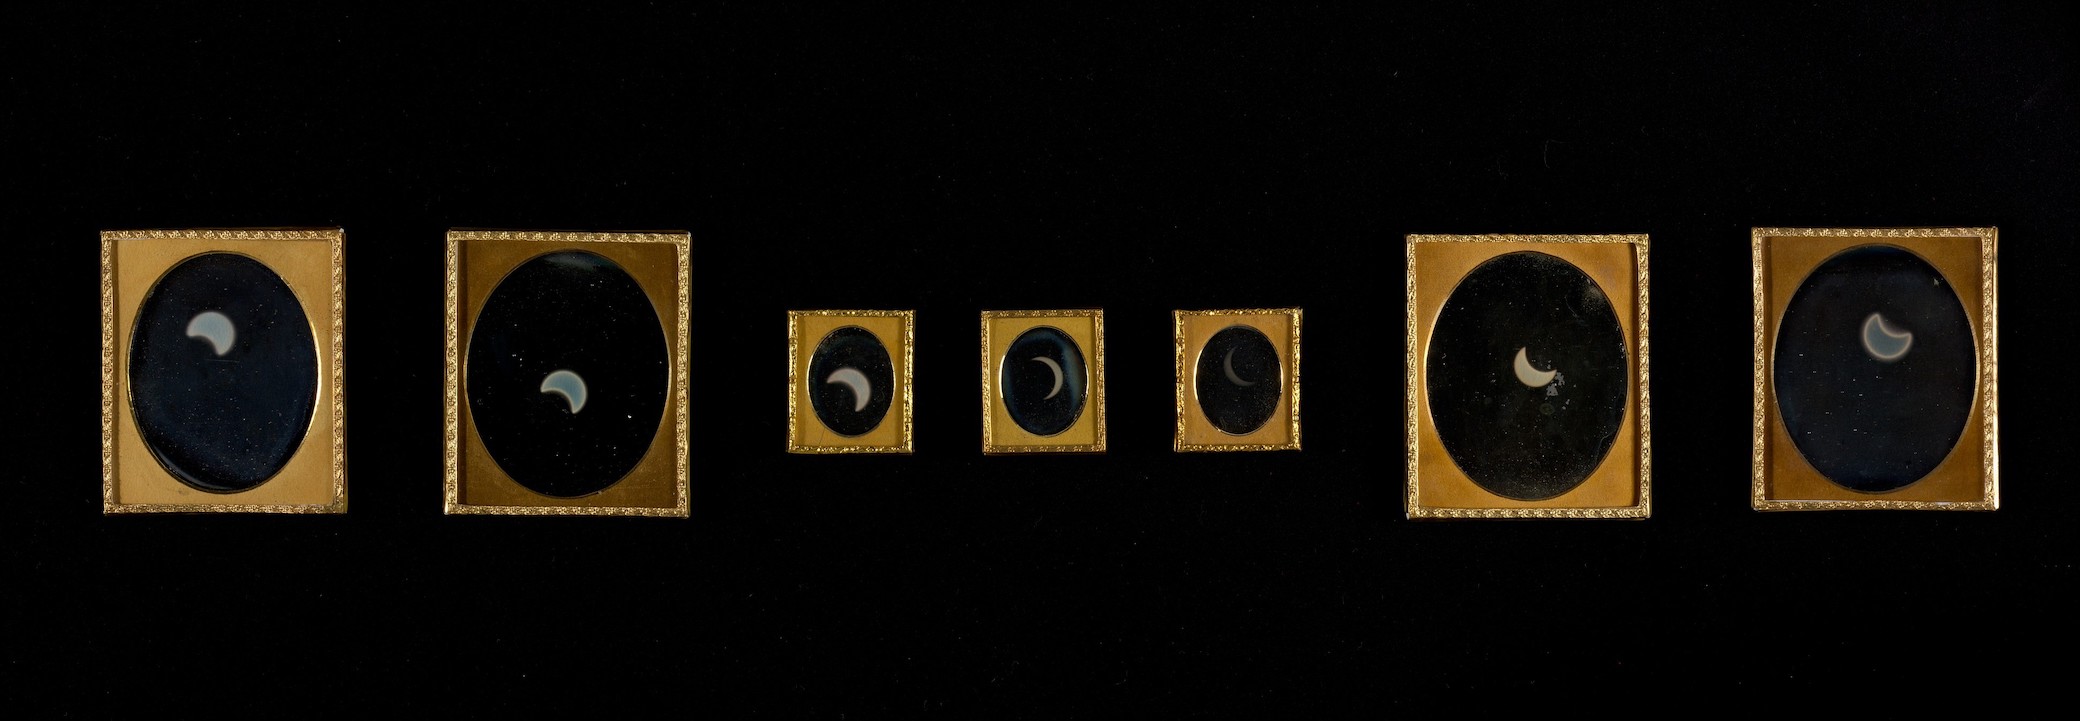 A series of seven daguerrotypes showing the progression of a solar eclipse.